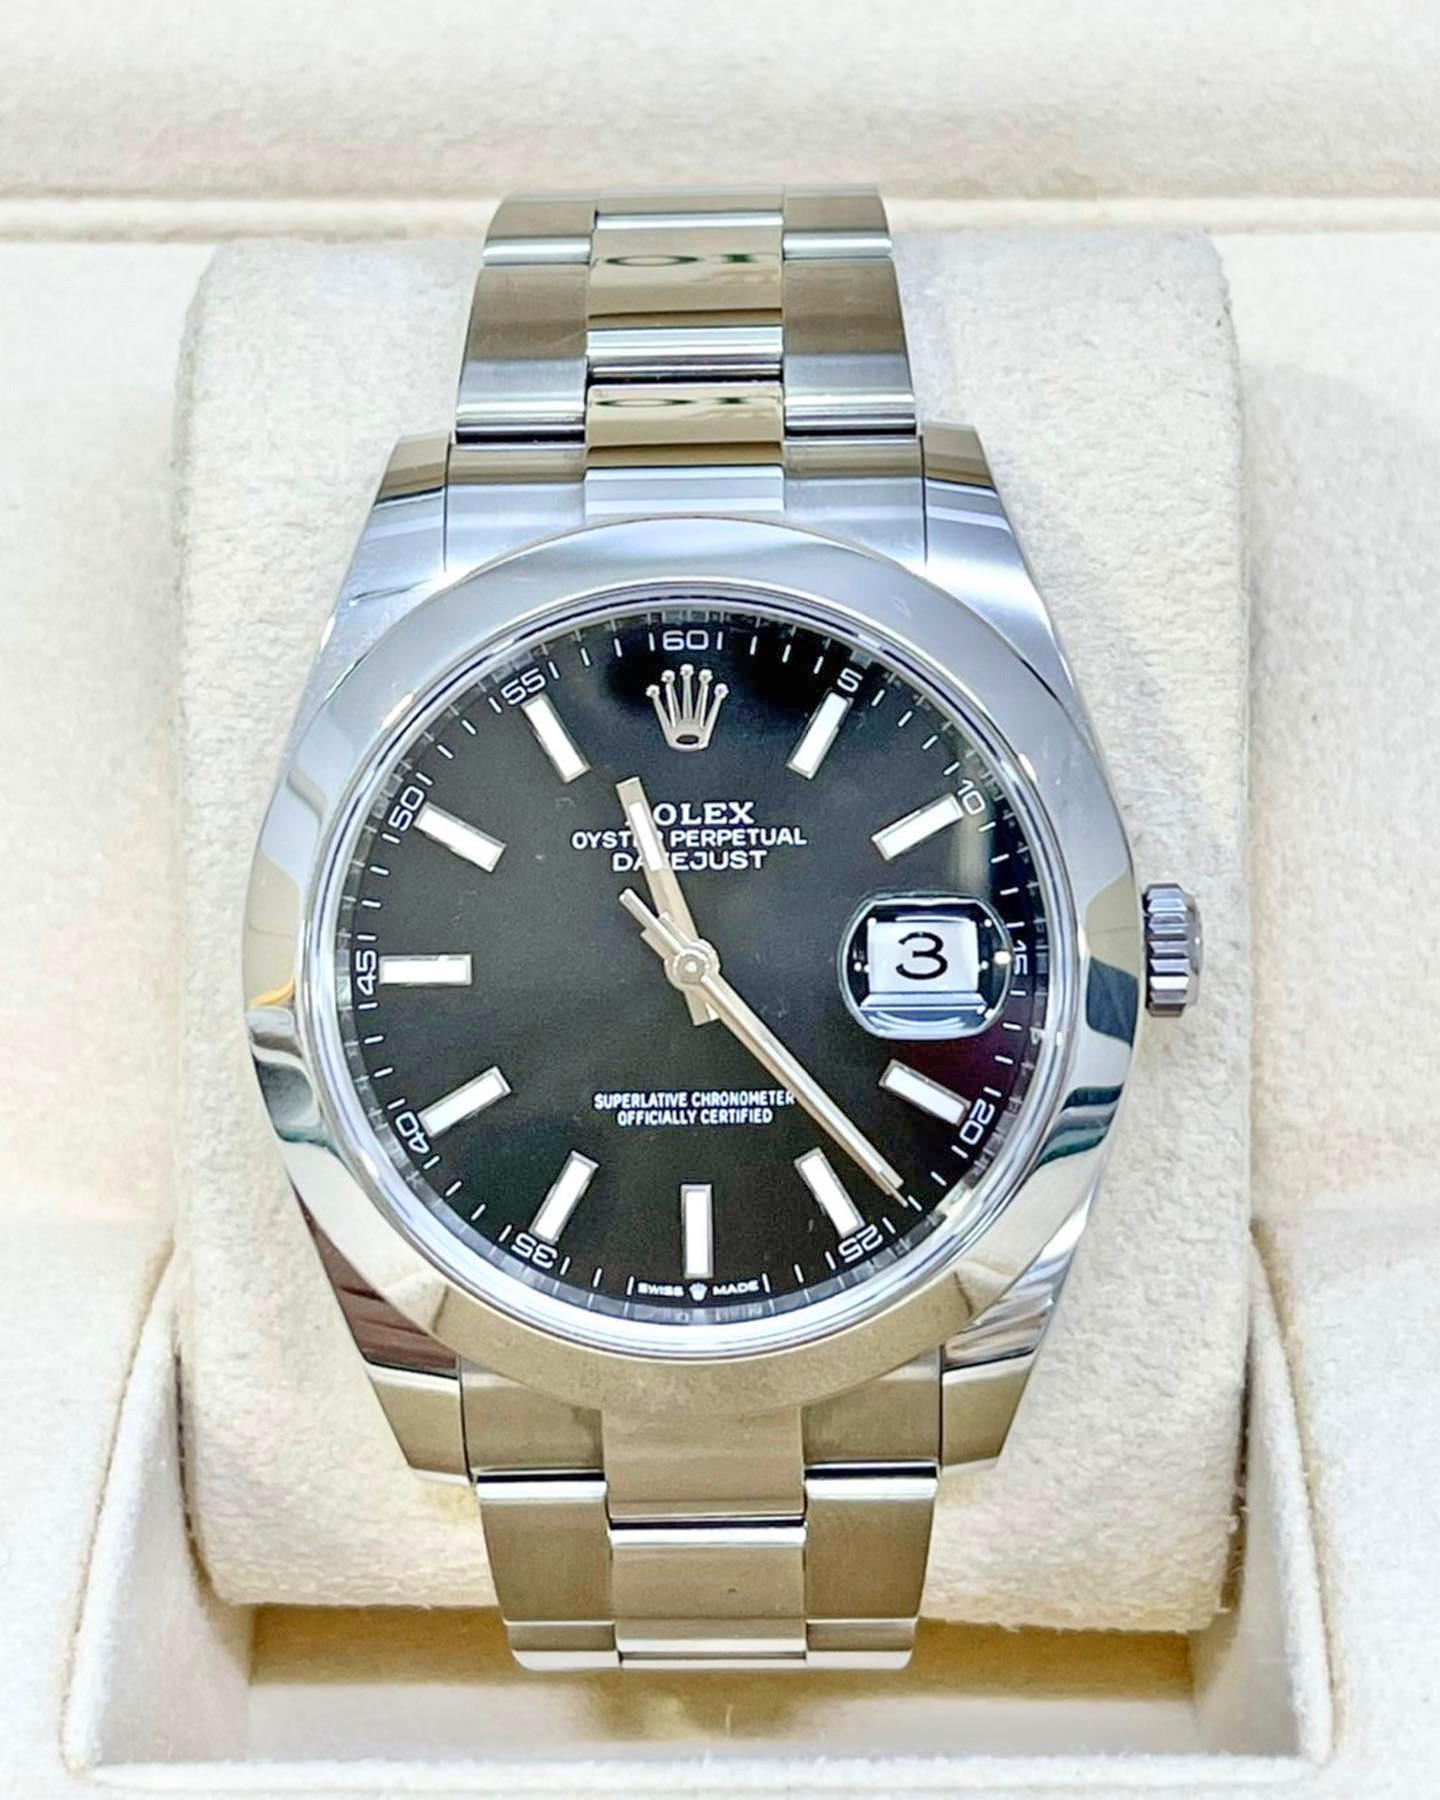 Rolex Datejust 41 watch with polished Stainless Steel case, Reference 126300-0011. This model has Bright black dial with a fine sunray and highly legible Chromalight display with long-lasting blue luminescence. The dial is adorned with polished